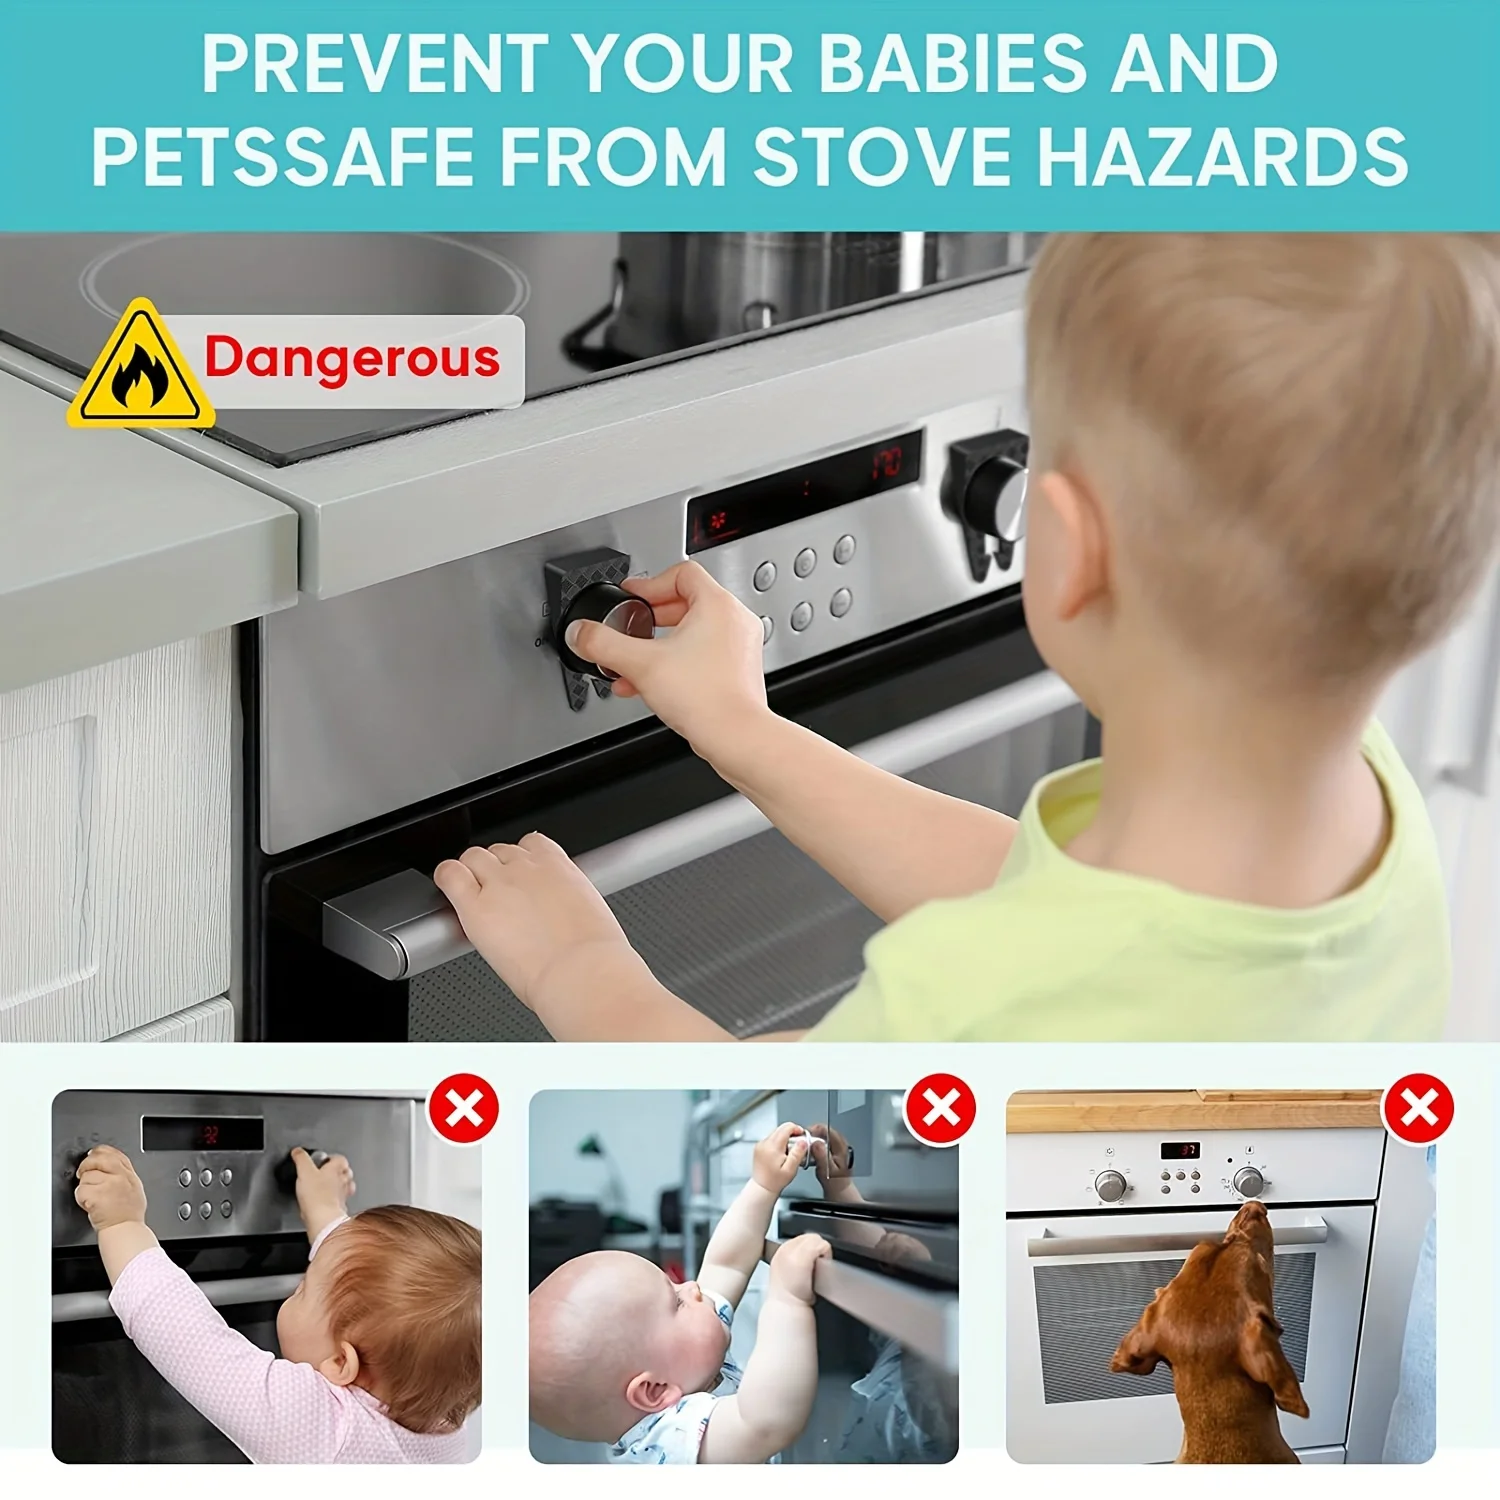 Gas Stove Knob Covers for Child Safety - Baby-Proof Locks for Your Gas Cooktop, Easy to Use & Heat Resistant, 1/4/8 PCS